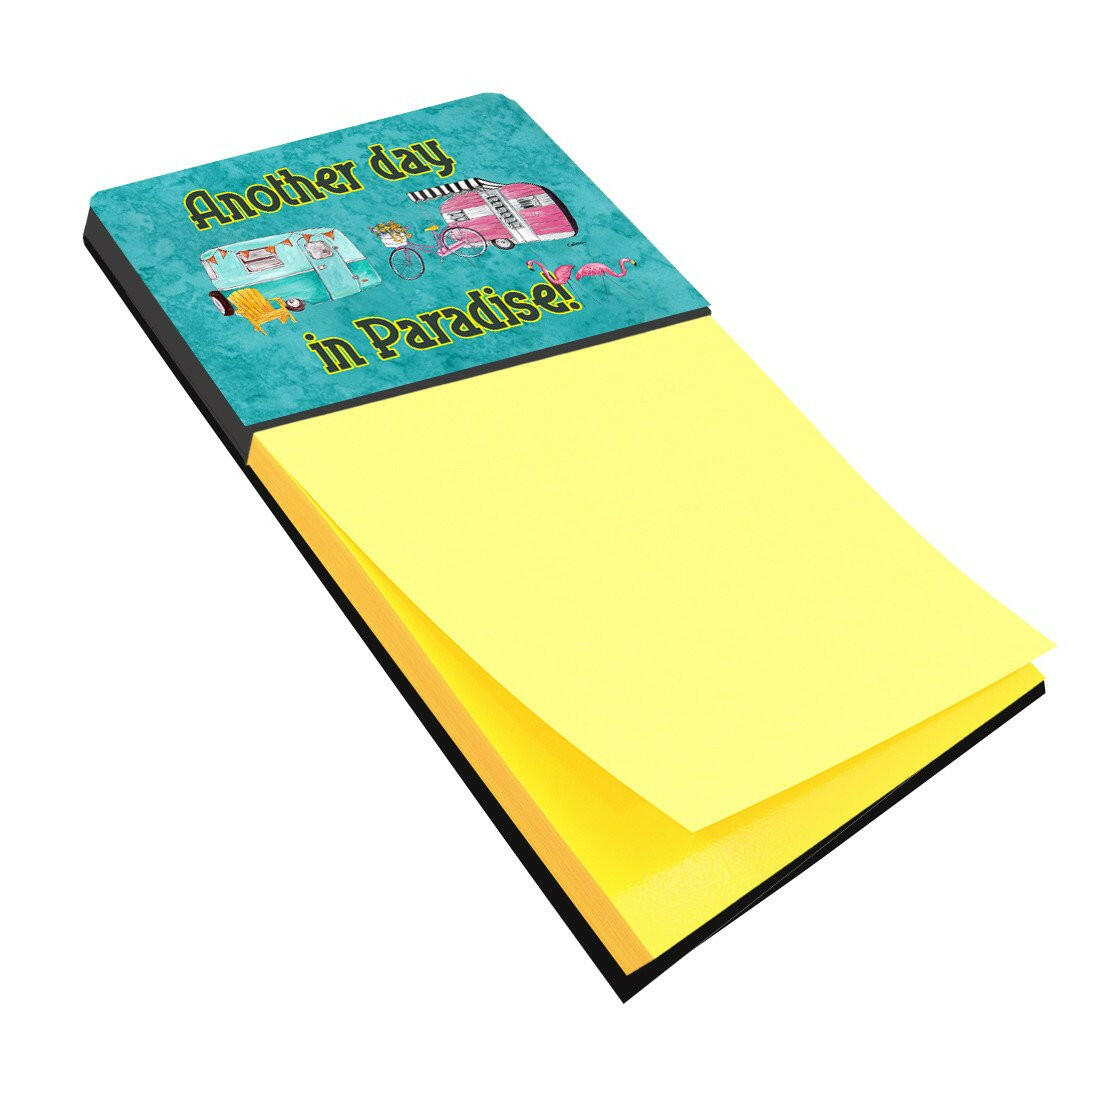 Another Day in Paradise Refiillable Sticky Note Holder or Postit Note Dispenser 8758SN by Caroline's Treasures